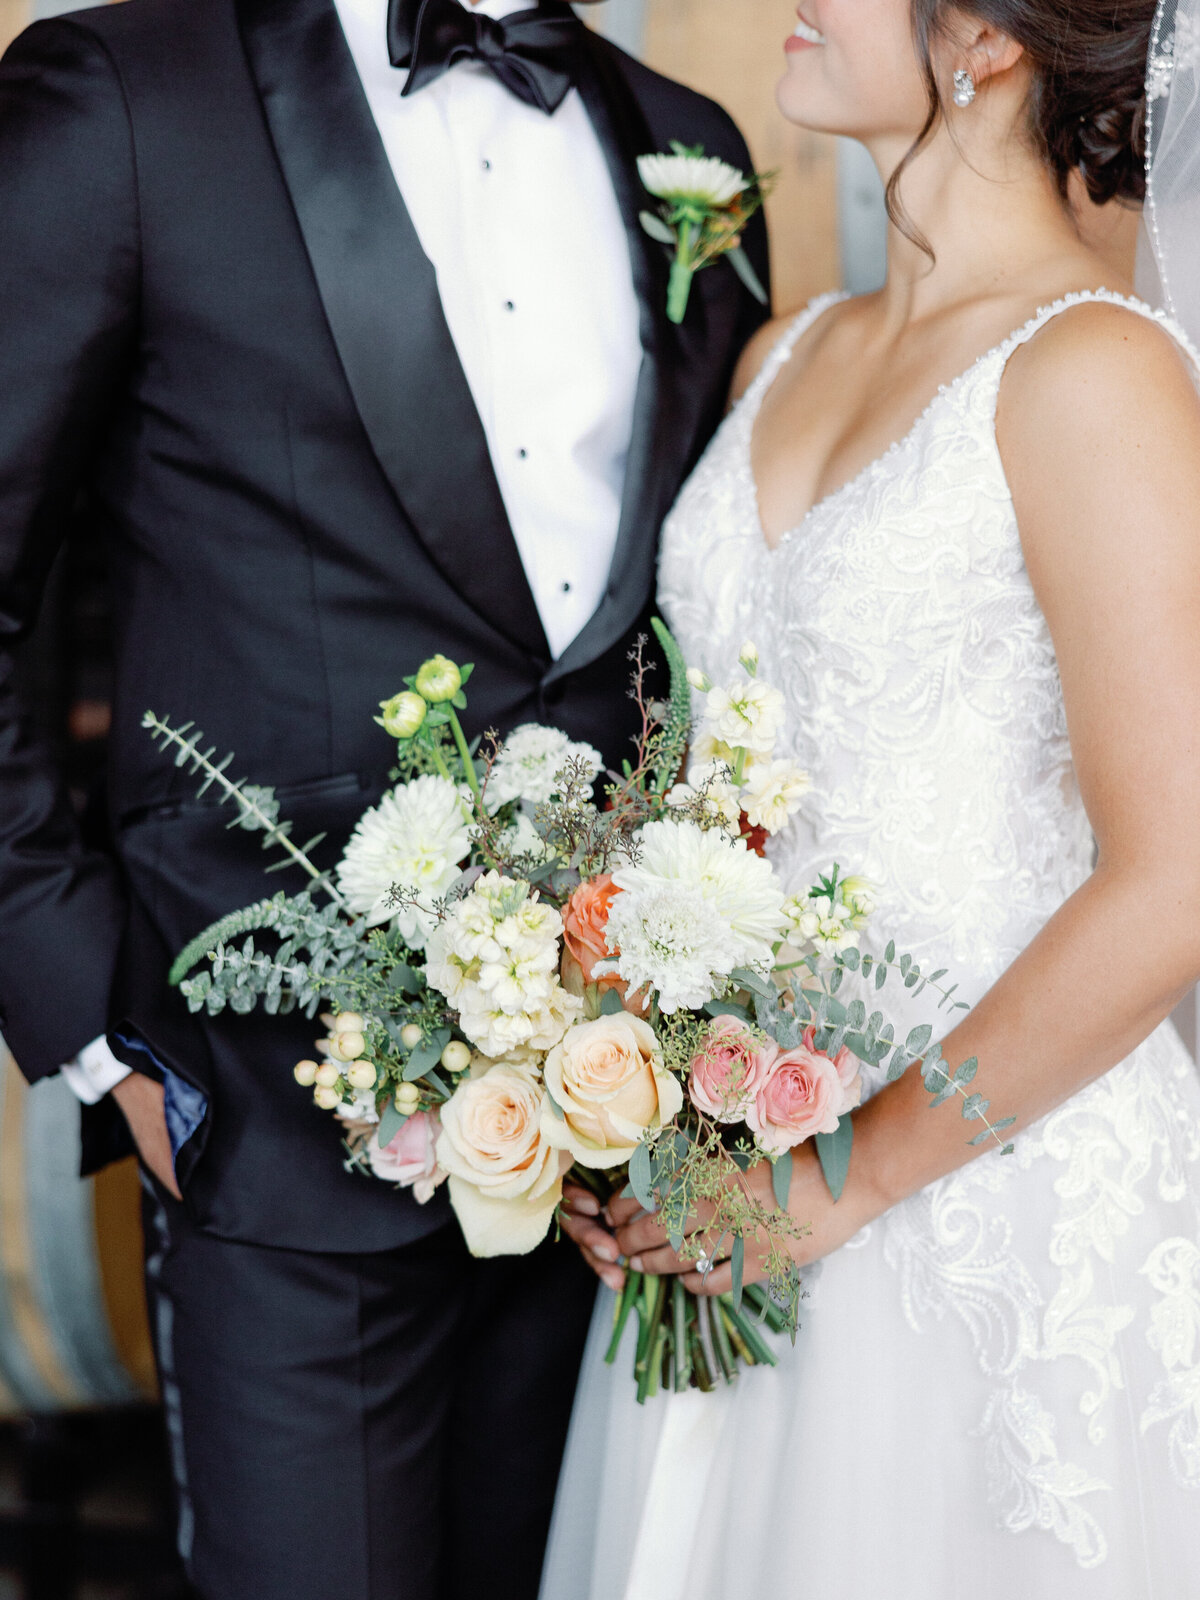 A close up of the bride's bouquet as she looks into the eye of her groom